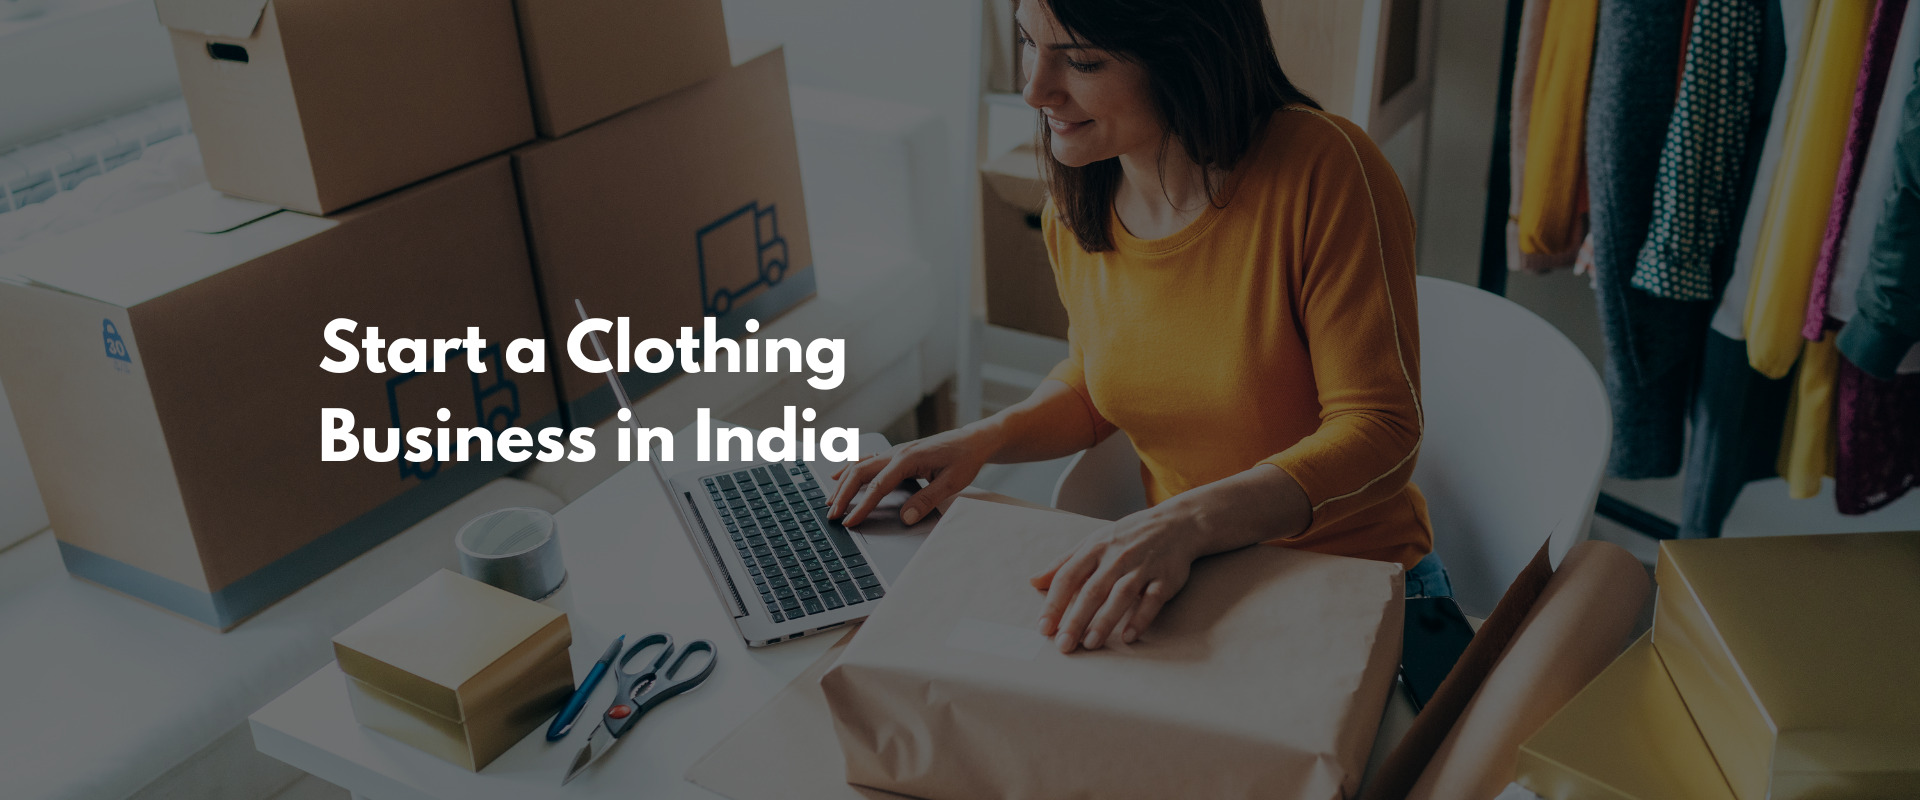 How To Start A Clothing Business Online In India? (10 Benefits)